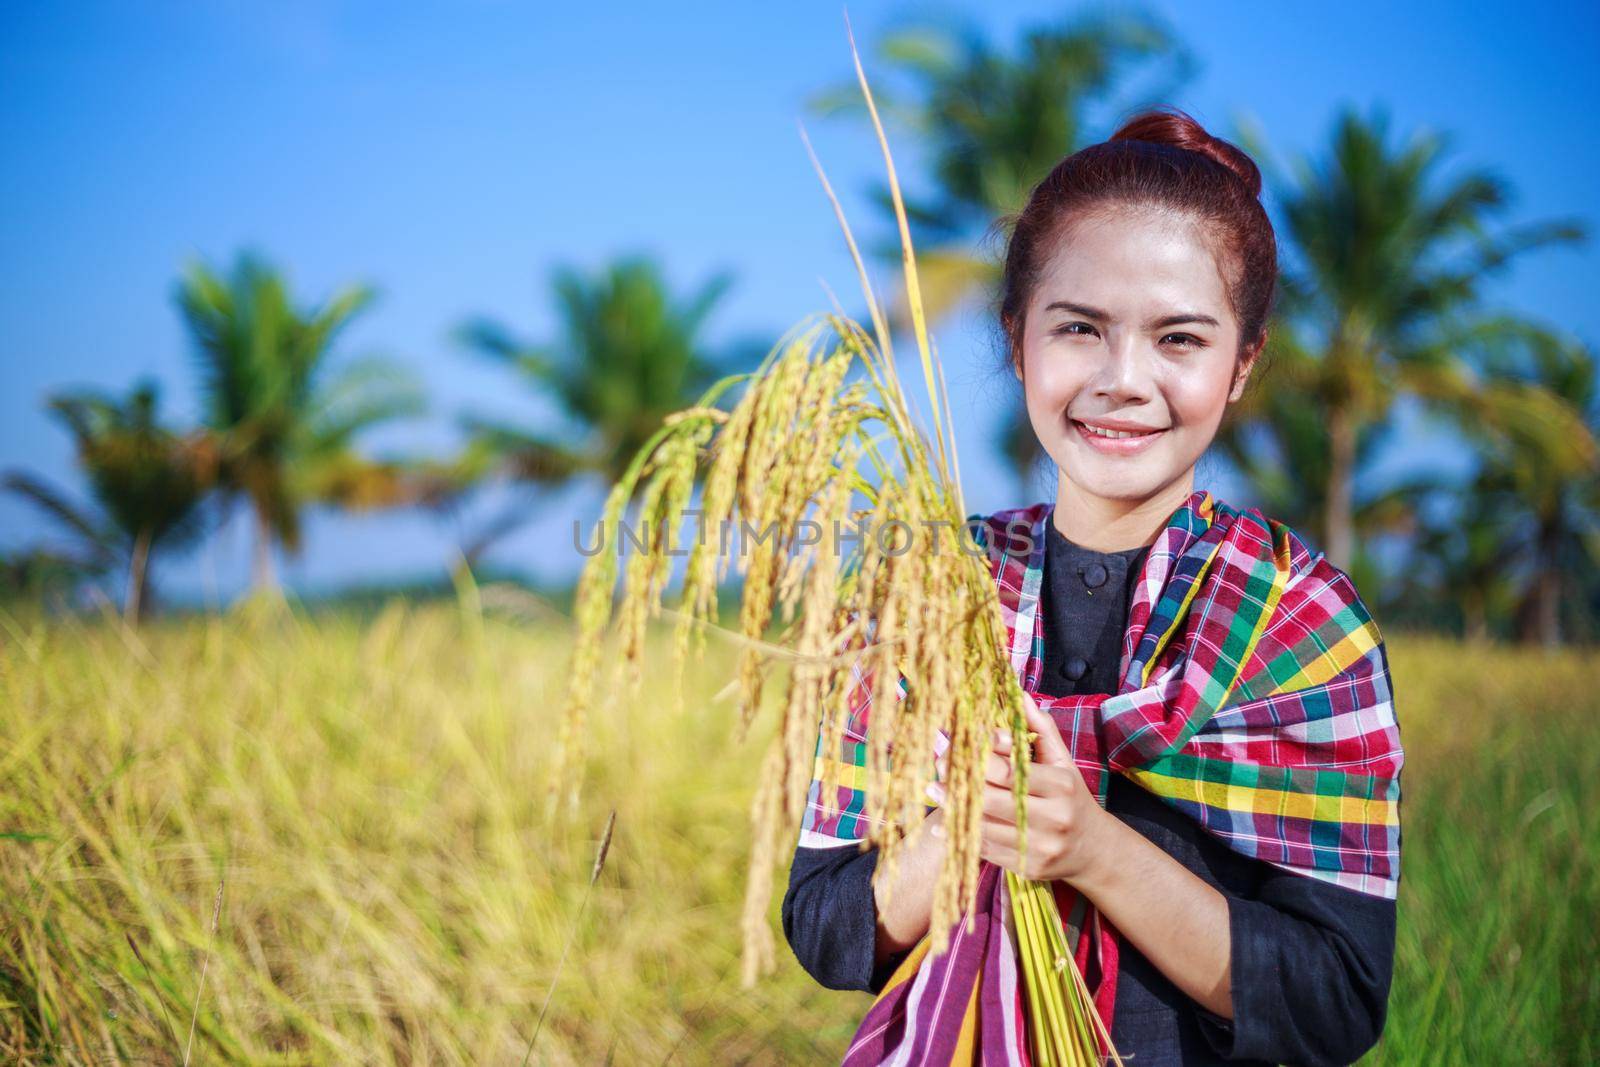 farmer woman holding rice in field, Thailand